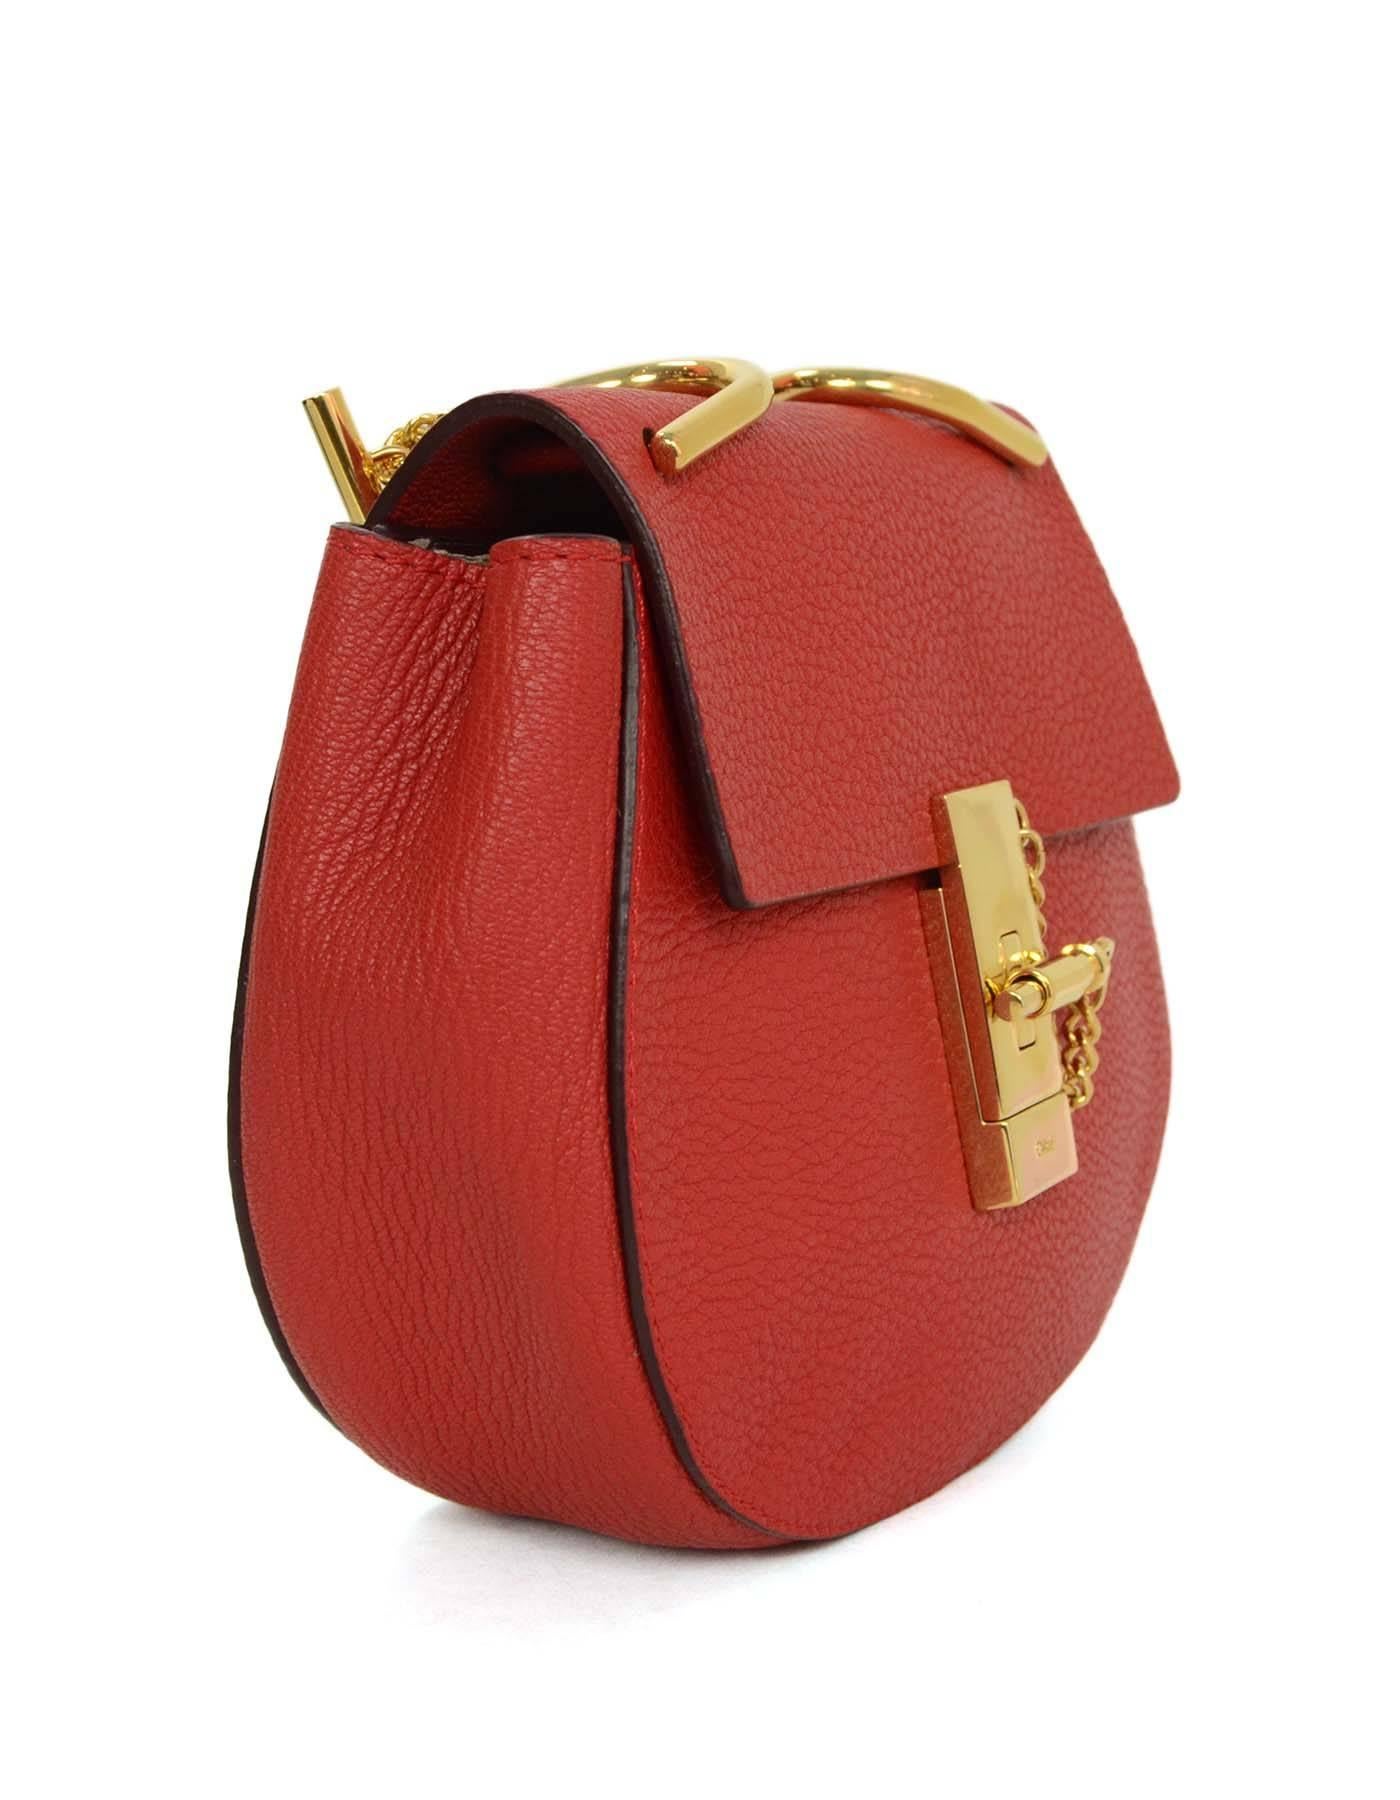 Chloe Red Leather Drew Mini Crossbody Bag GHW
Features mini saddle bag silhouette

Made In: Italy
Color: Red
Hardware: Gold
Materials: Leather
Lining: Tan suede
Closure/Opening: Flap top with turn-lock bar and chain closure
Exterior